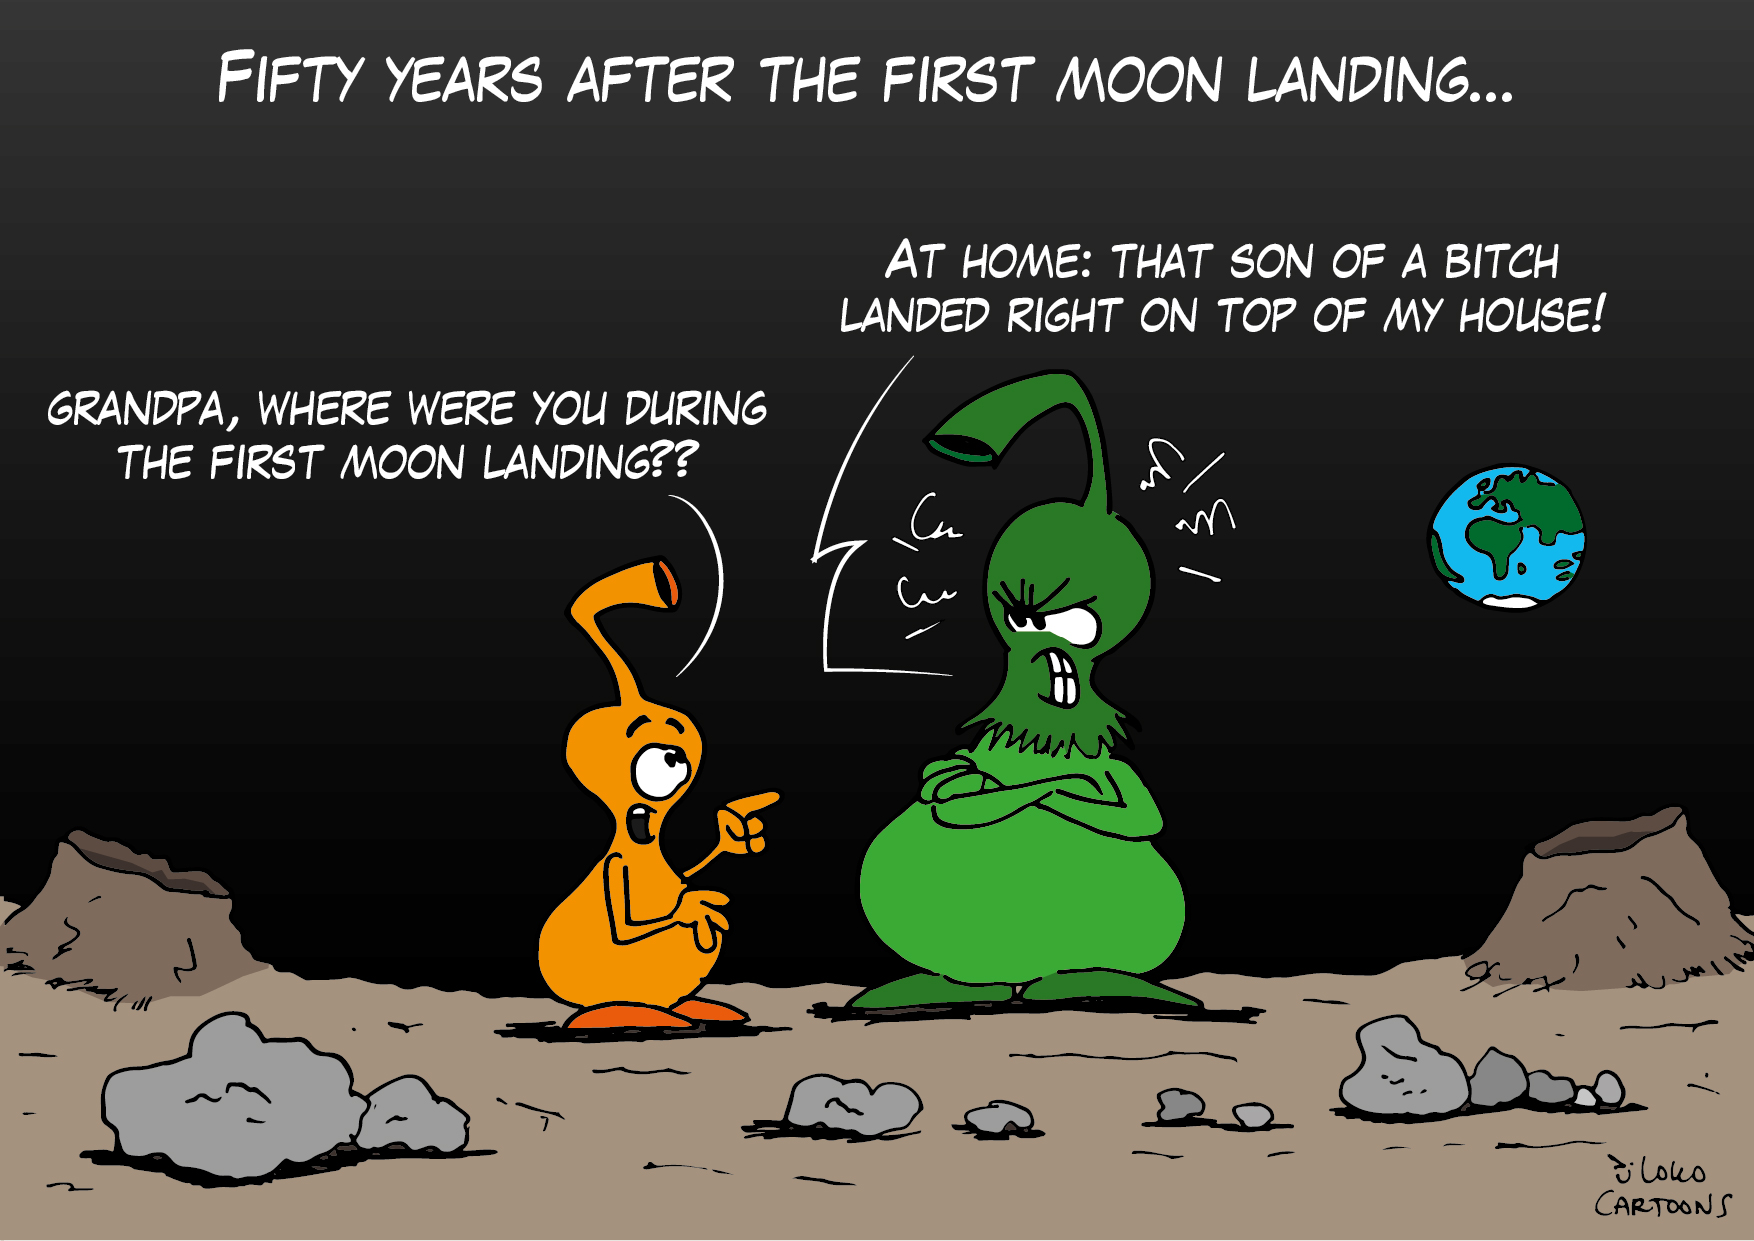 Fifty years after the first moon landing…